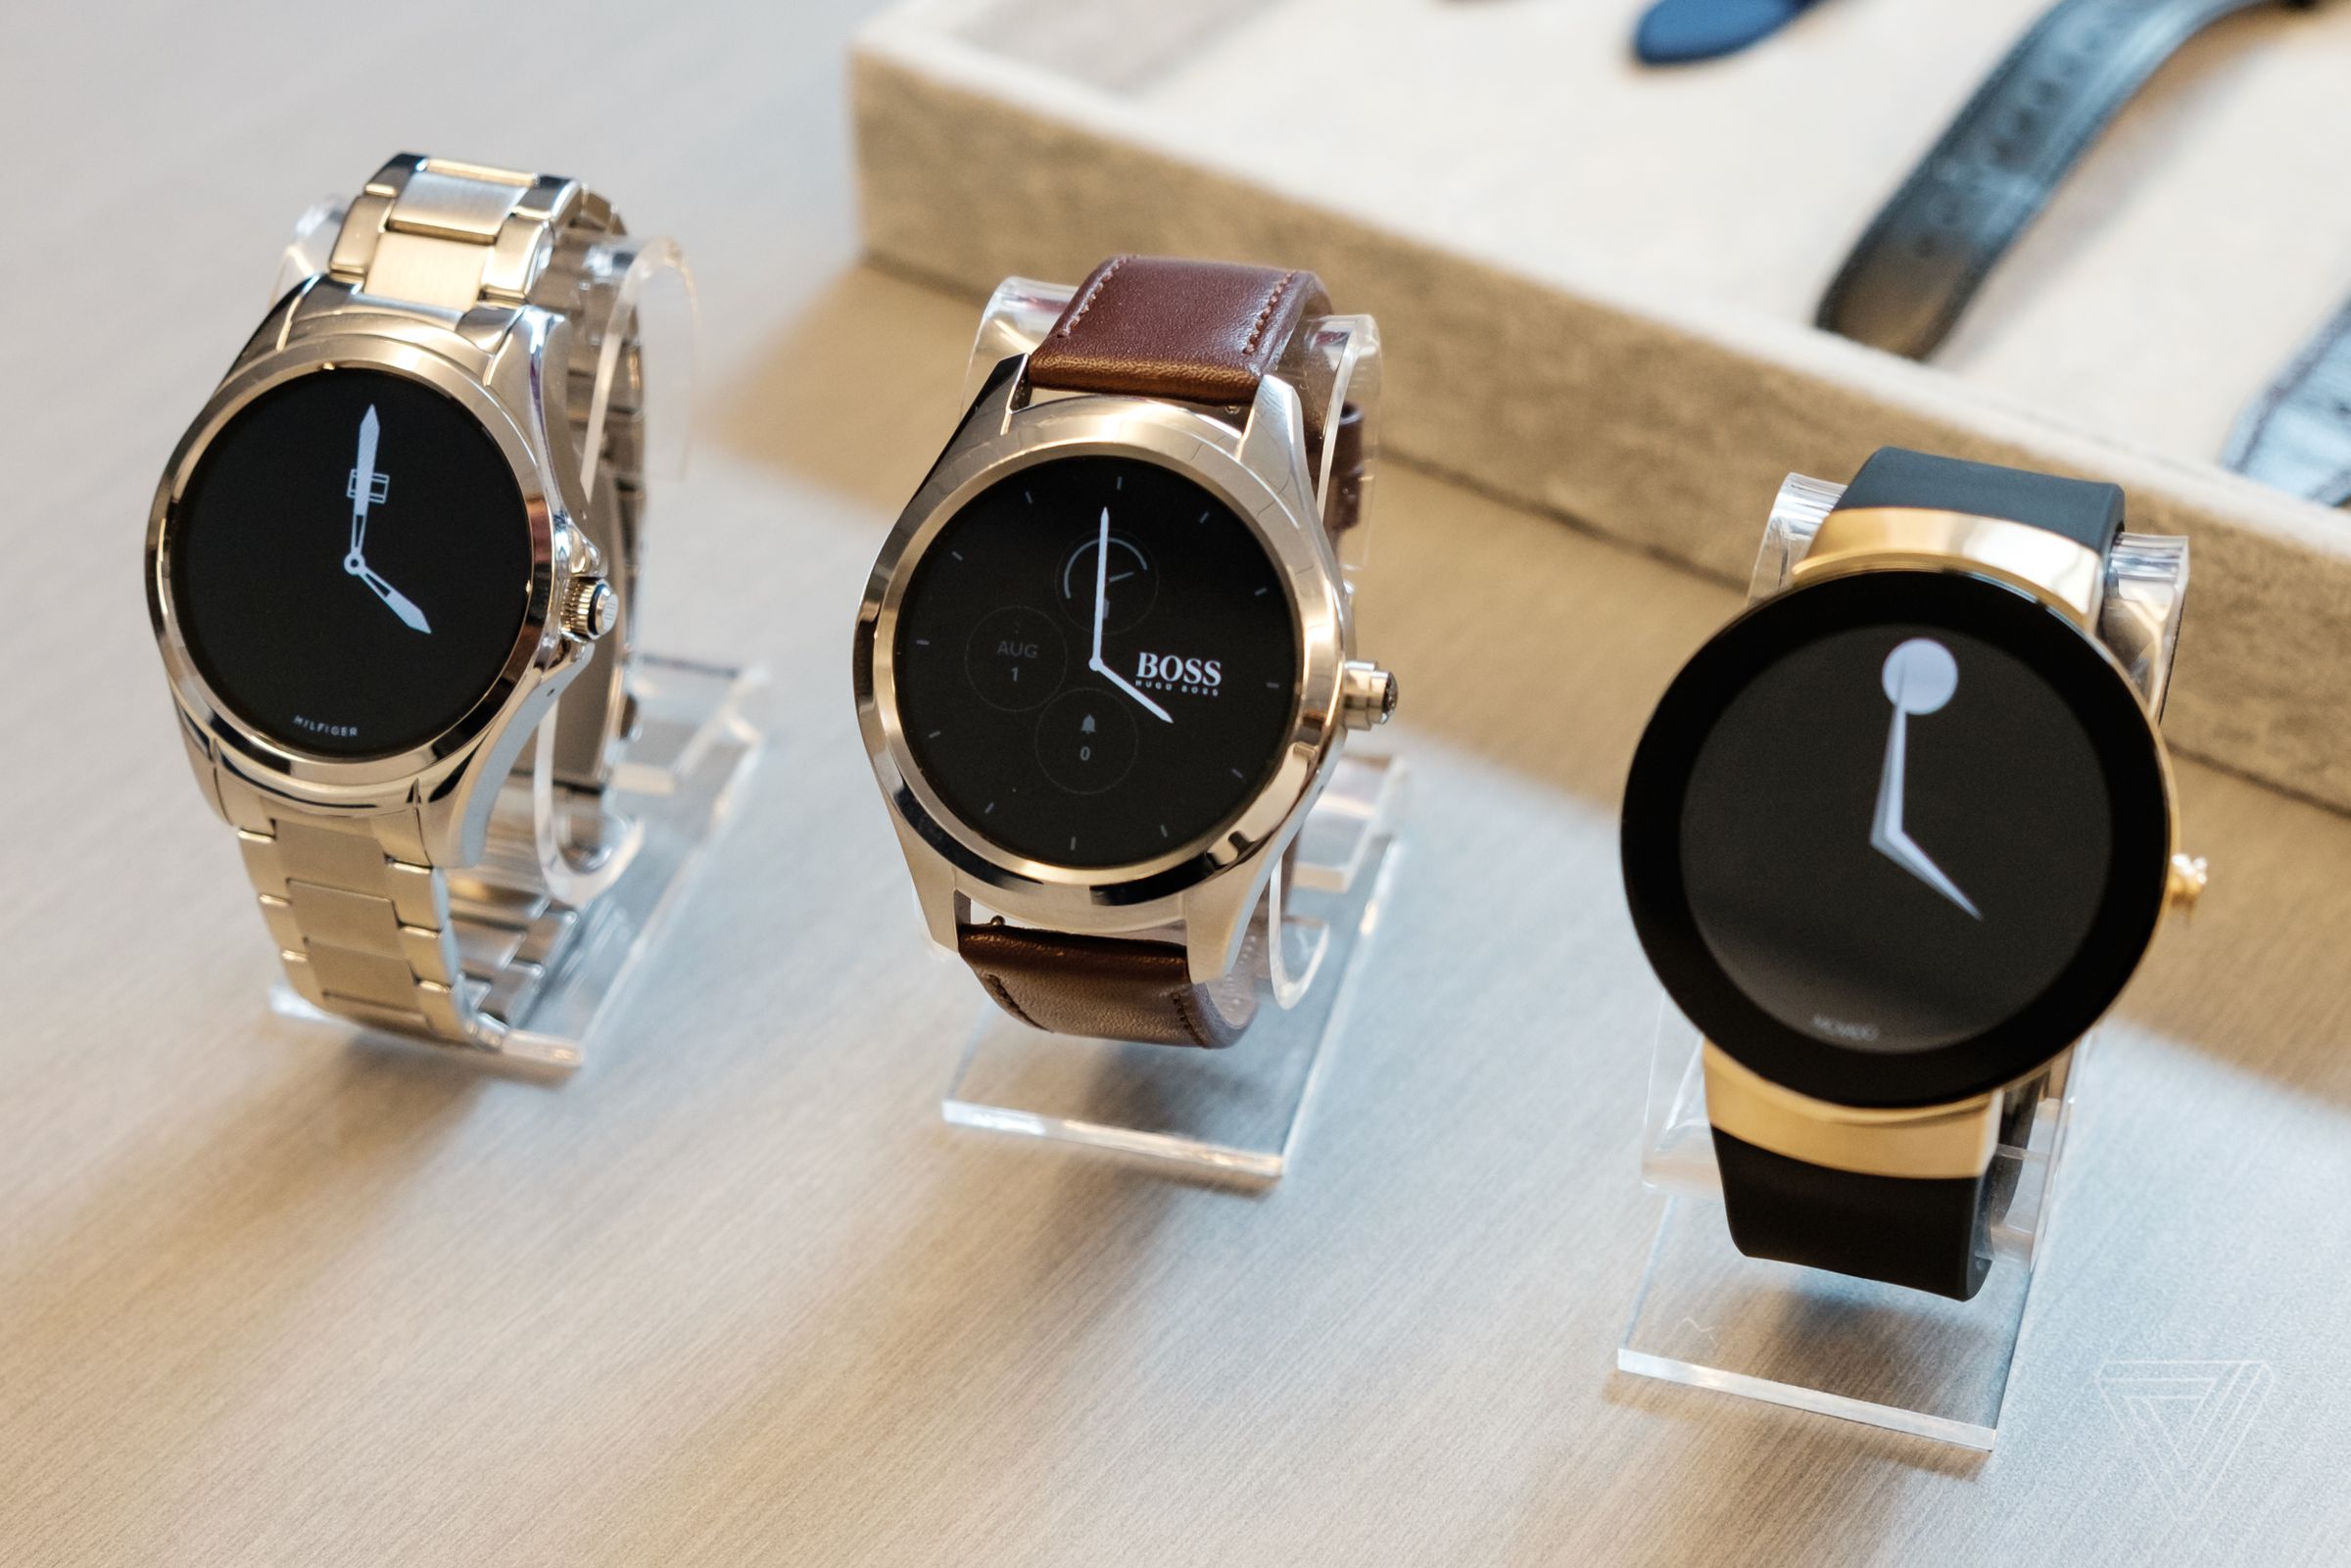 Tommy Hilfiger, Hugo Boss, and Movado Android Wear smartwatches.